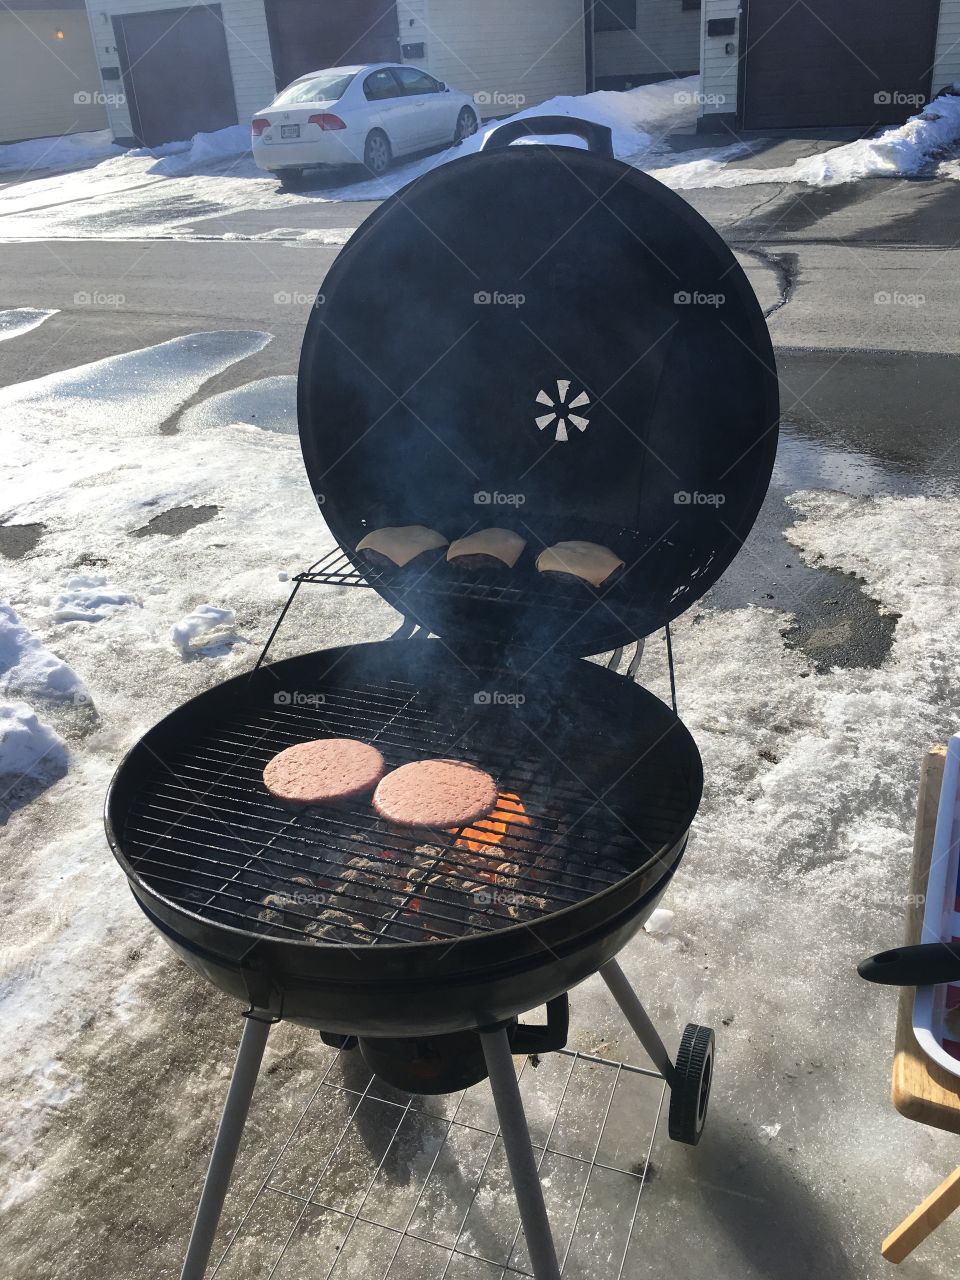 Grill holding some food in alaska